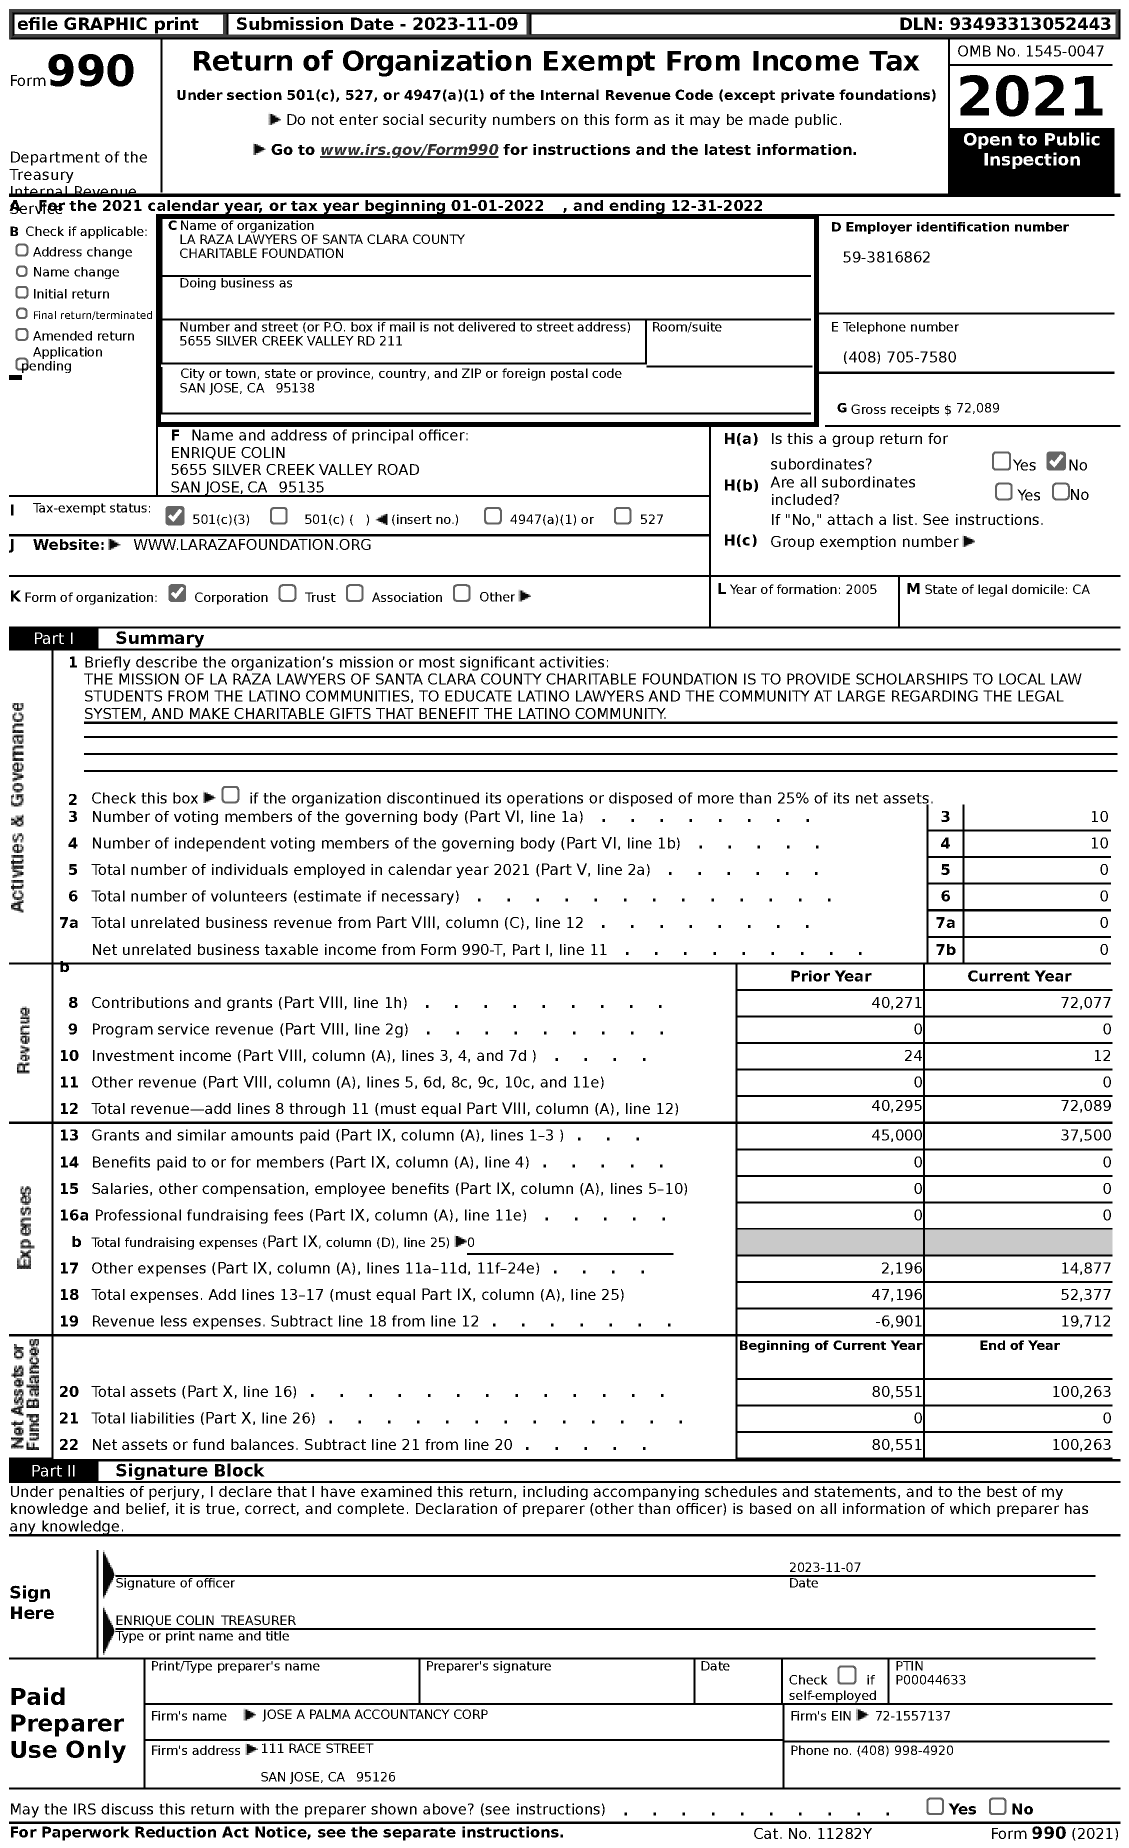 Image of first page of 2022 Form 990 for La Raza Lawyers of Santa Clara County Charitable Foundation